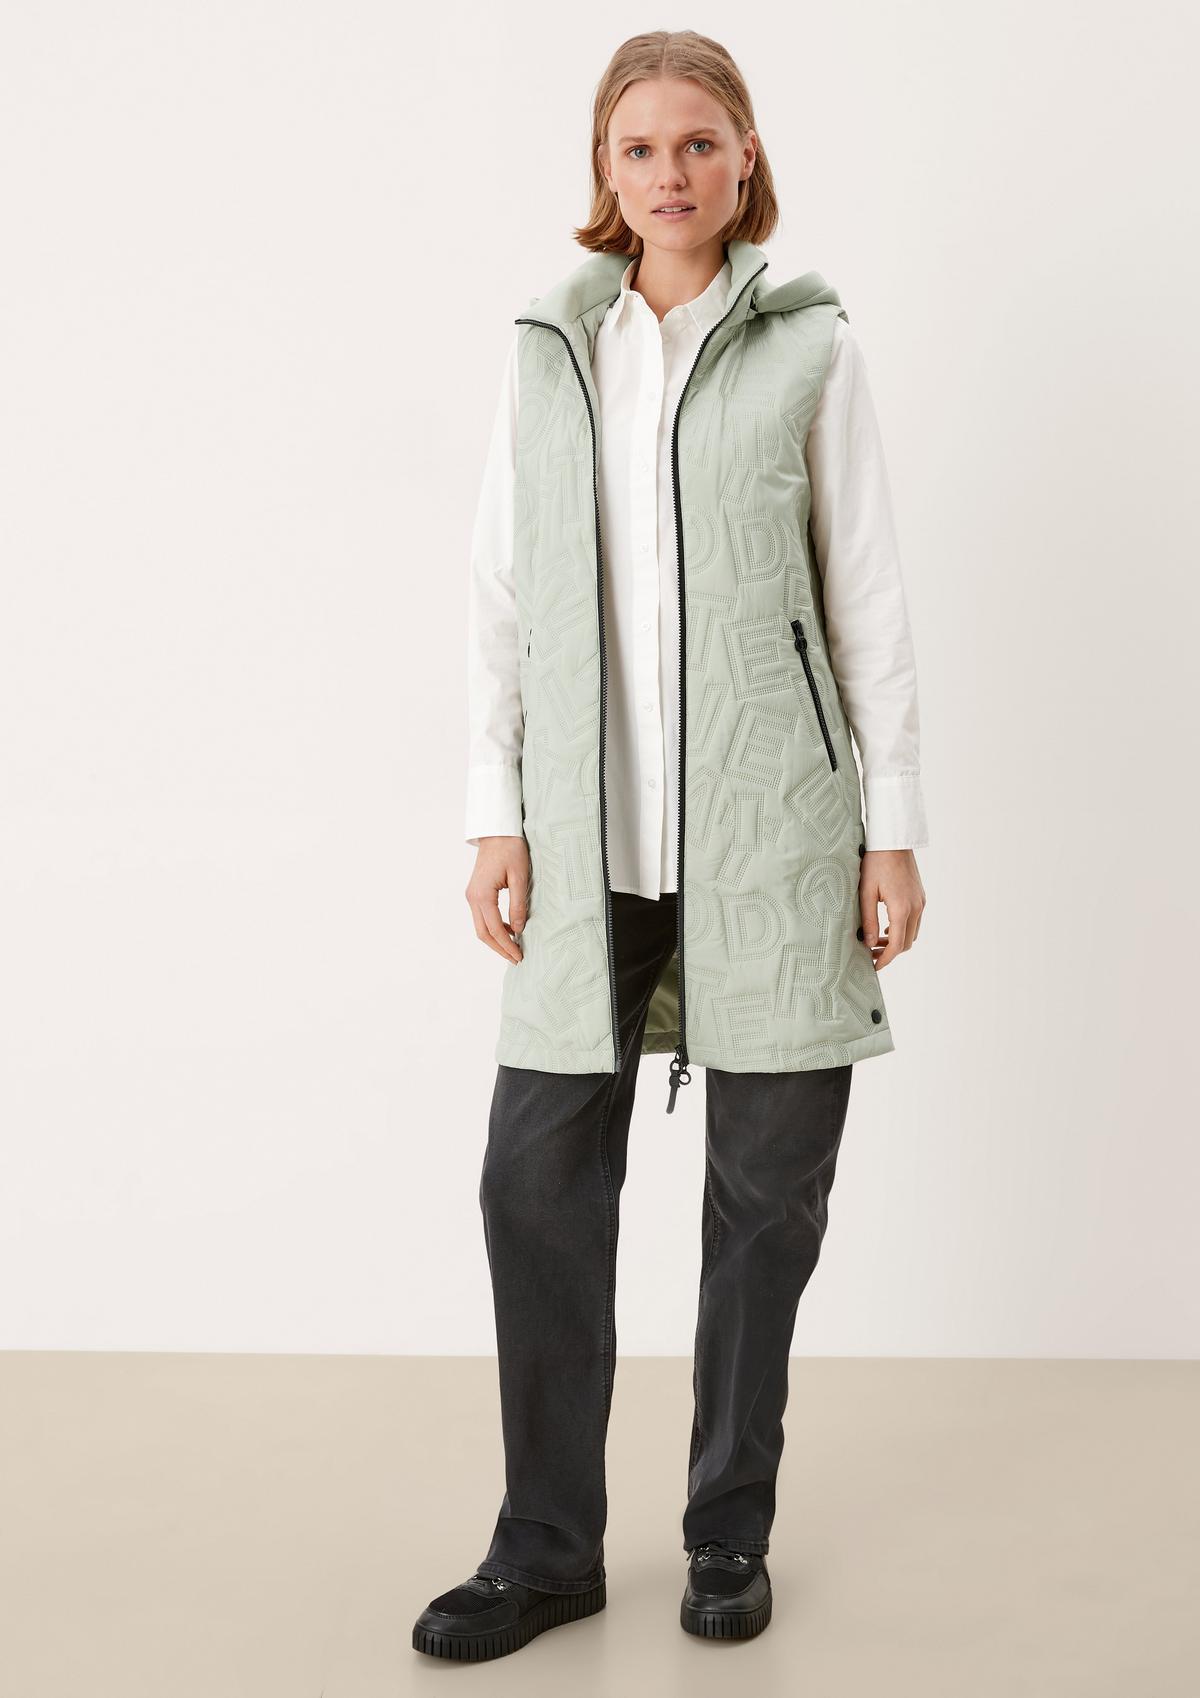 s.Oliver Body warmer with a textured pattern